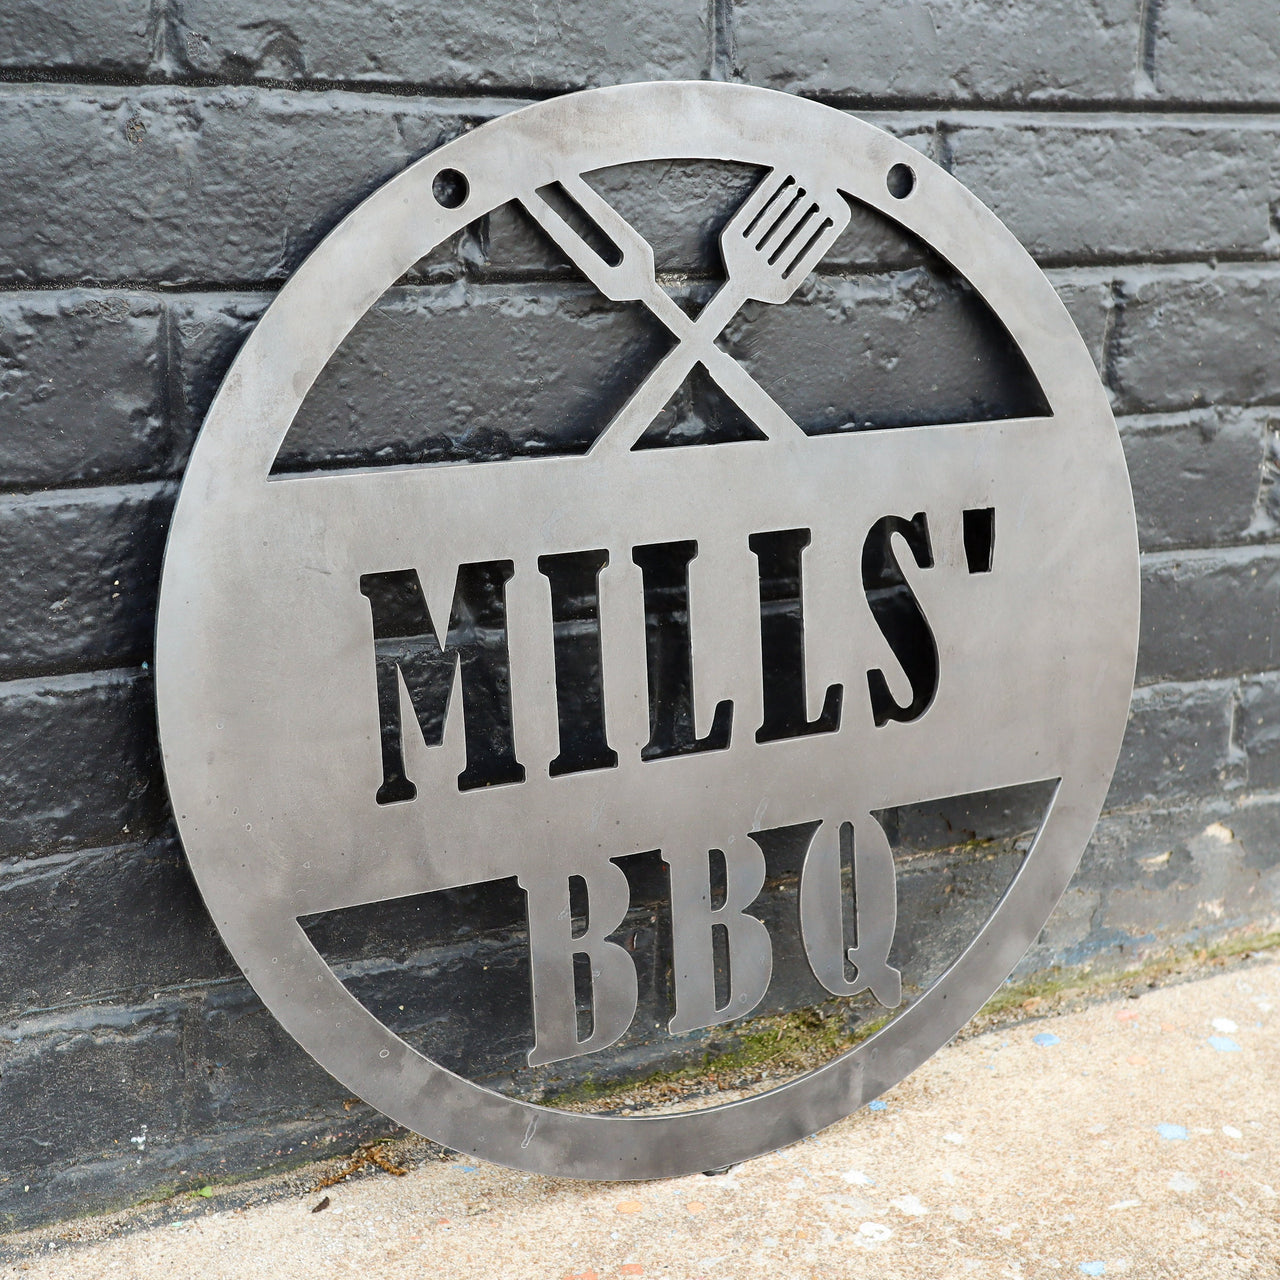 Personalized Metal BBQ Sign - Outdoor Grilling Patio Decor - Man Cave Wall Art